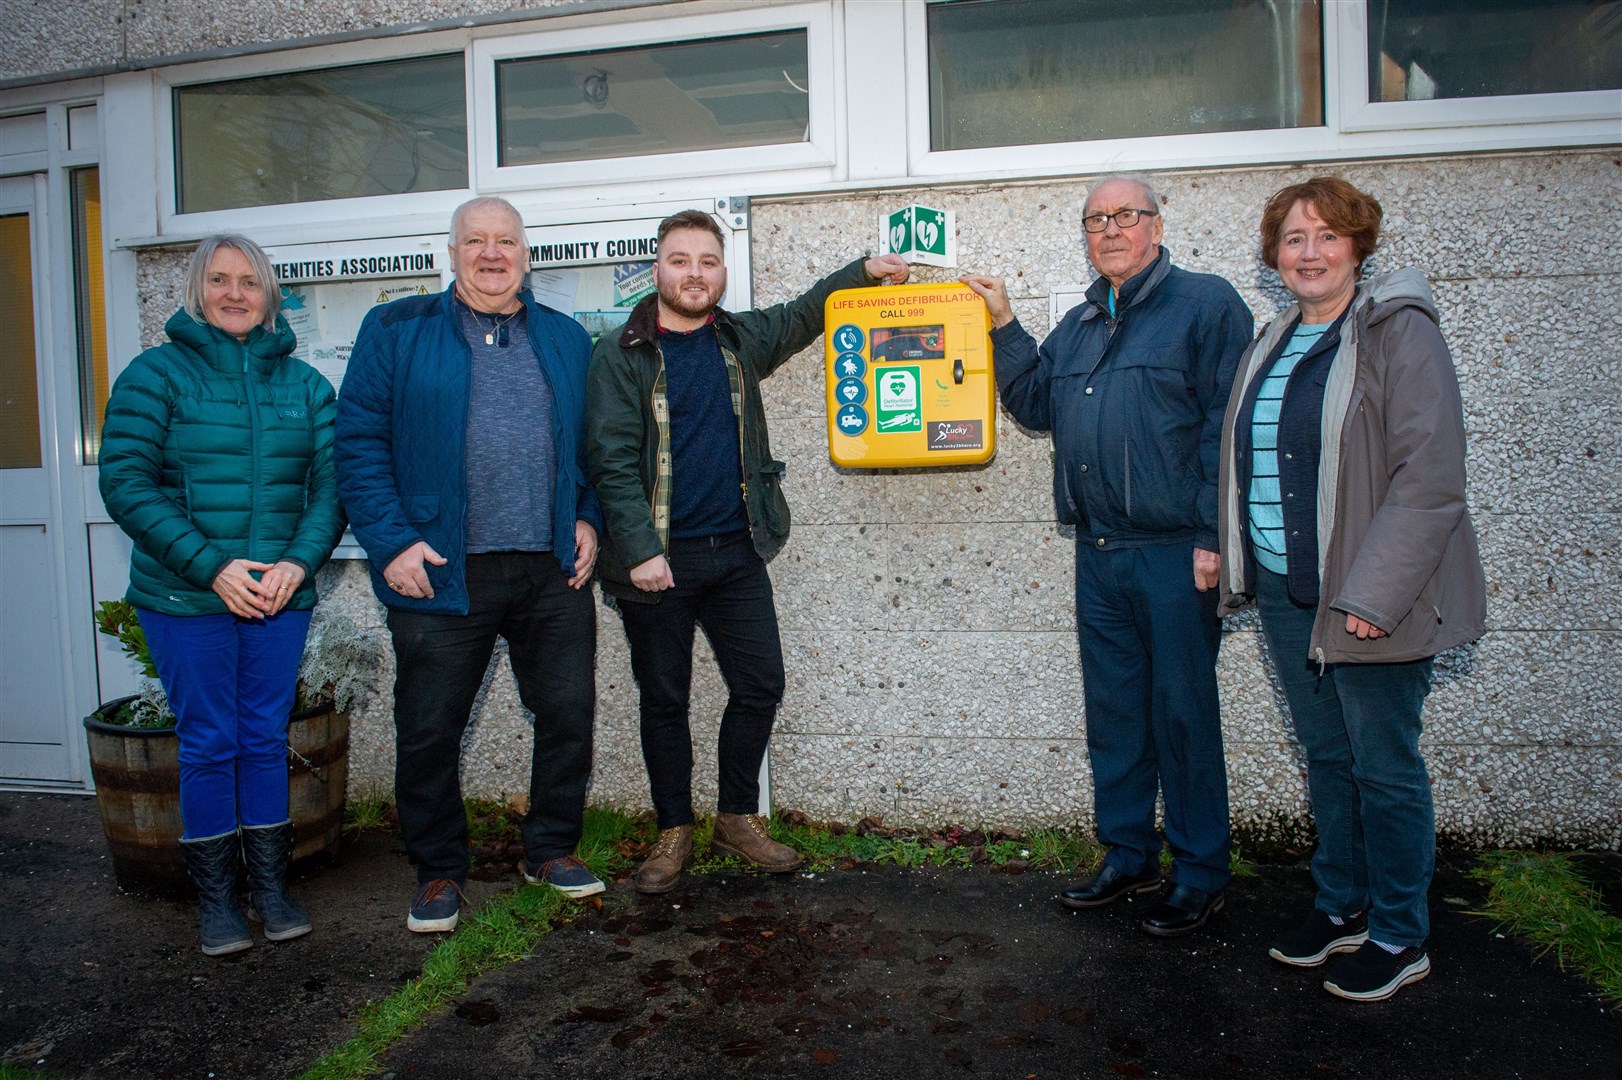 Christine Graham, Donald Stewart and Peter Dingwall of Maryburgh Community Council with Duncan 'Spanky' Stewart and ward councillor Angela Maclean.